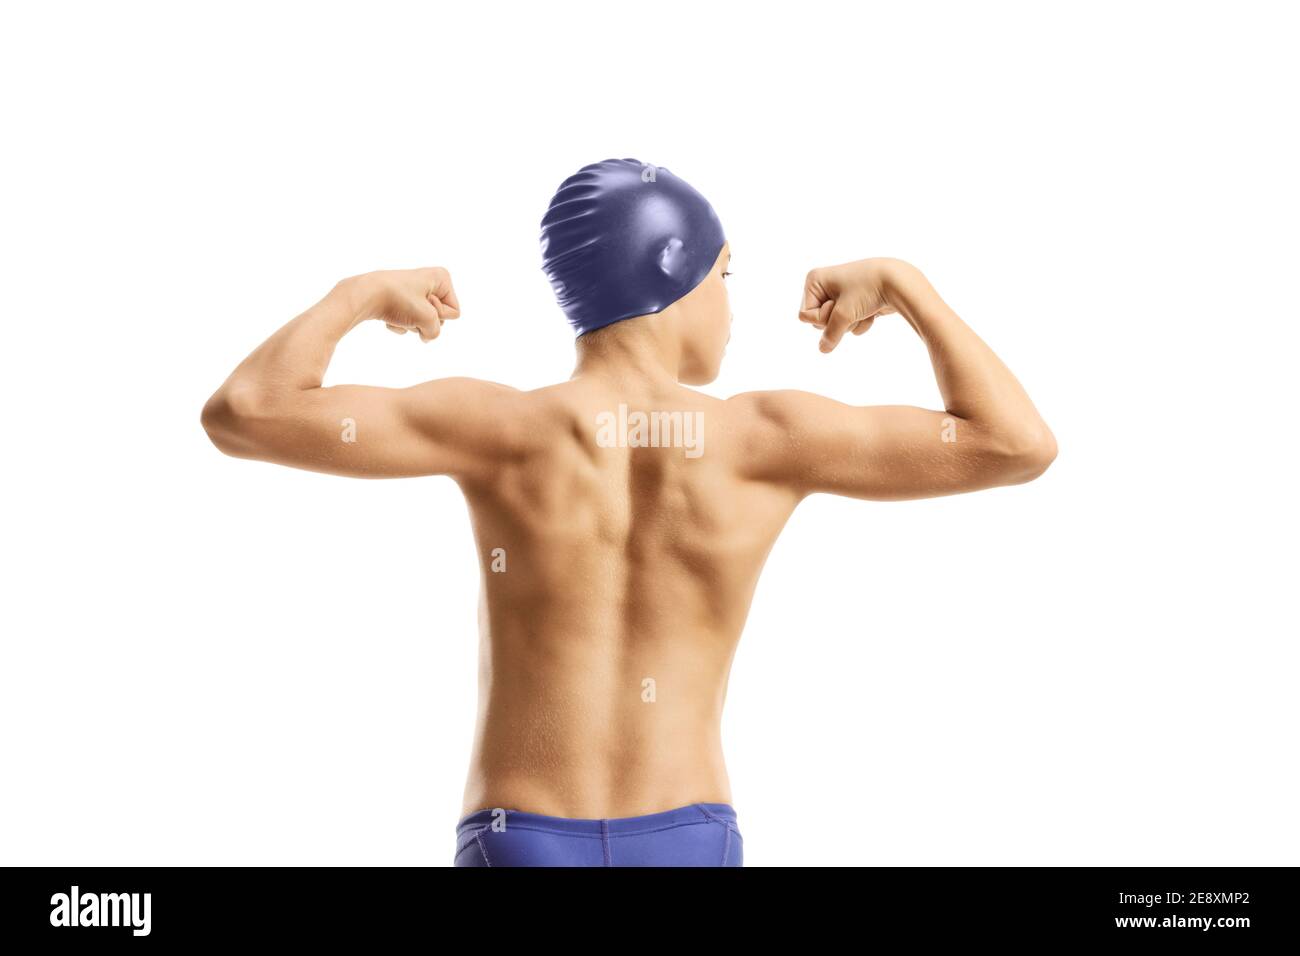 Boy swimmer flexing muscles isolated on white background Stock Photo